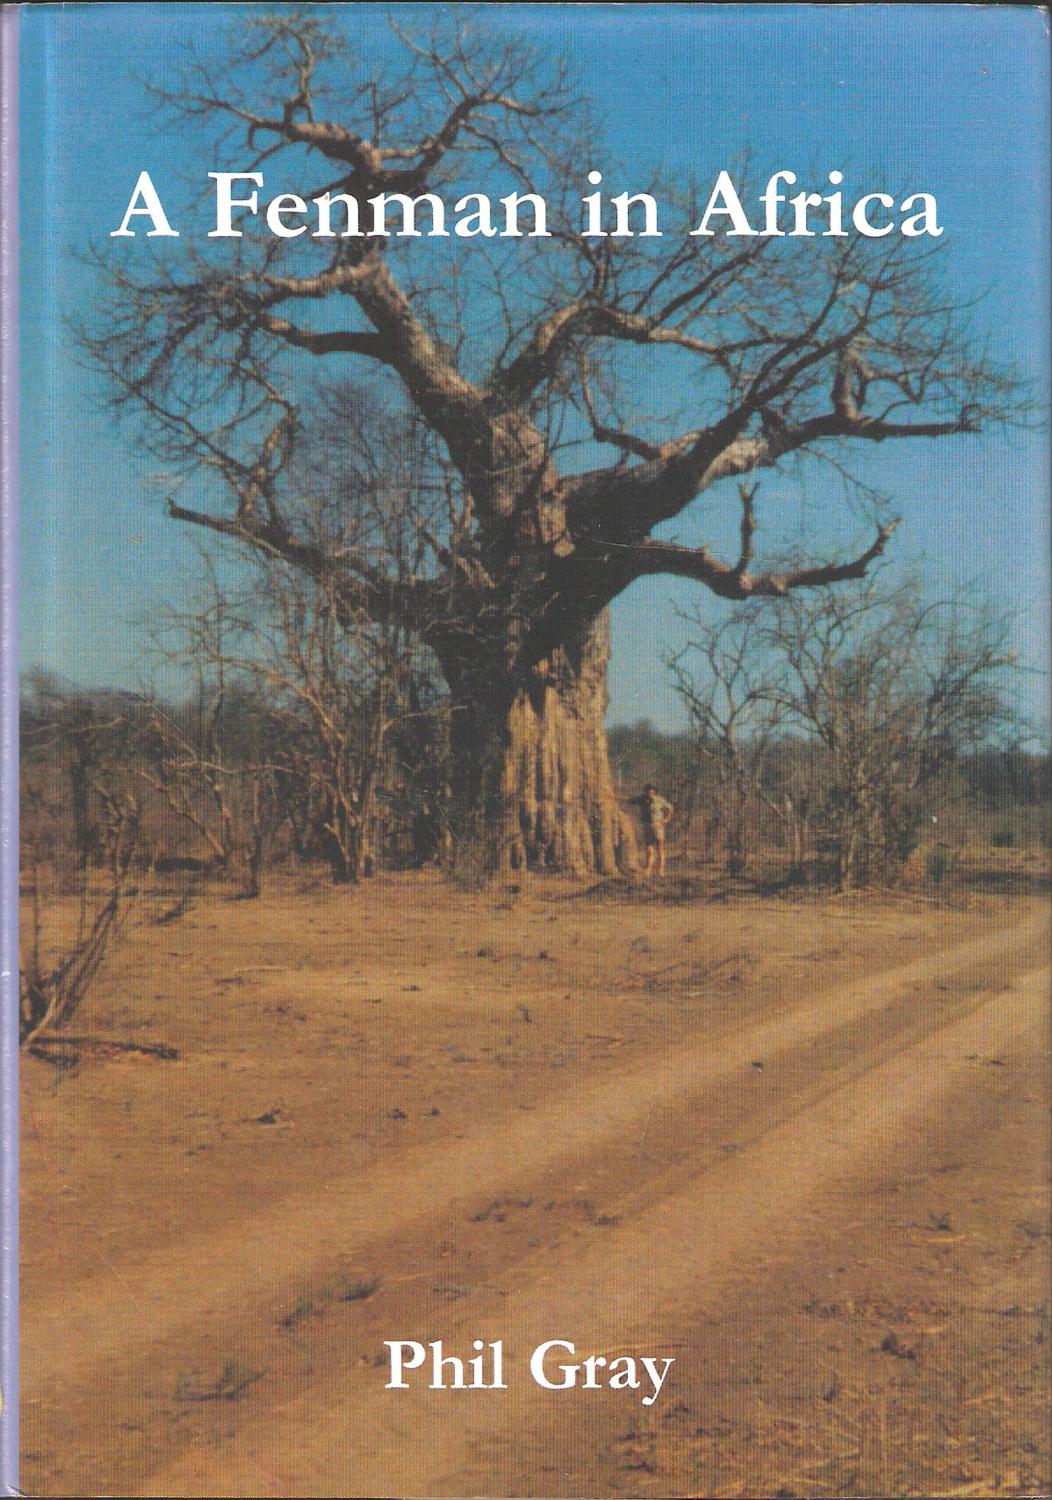 A FENMAN IN AFRICA: OR A LETTER FROM RHODESIA. THE AUTHOR'S DIARY OF A STAY ON A RHODESIAN FARM AND A HUNTING CAMP IN THE AFRICAN BUSH, WITH RELATED CORRESPONDENCE. By Phil Gray. - Gray (Philip Stephen). (b. 1941).